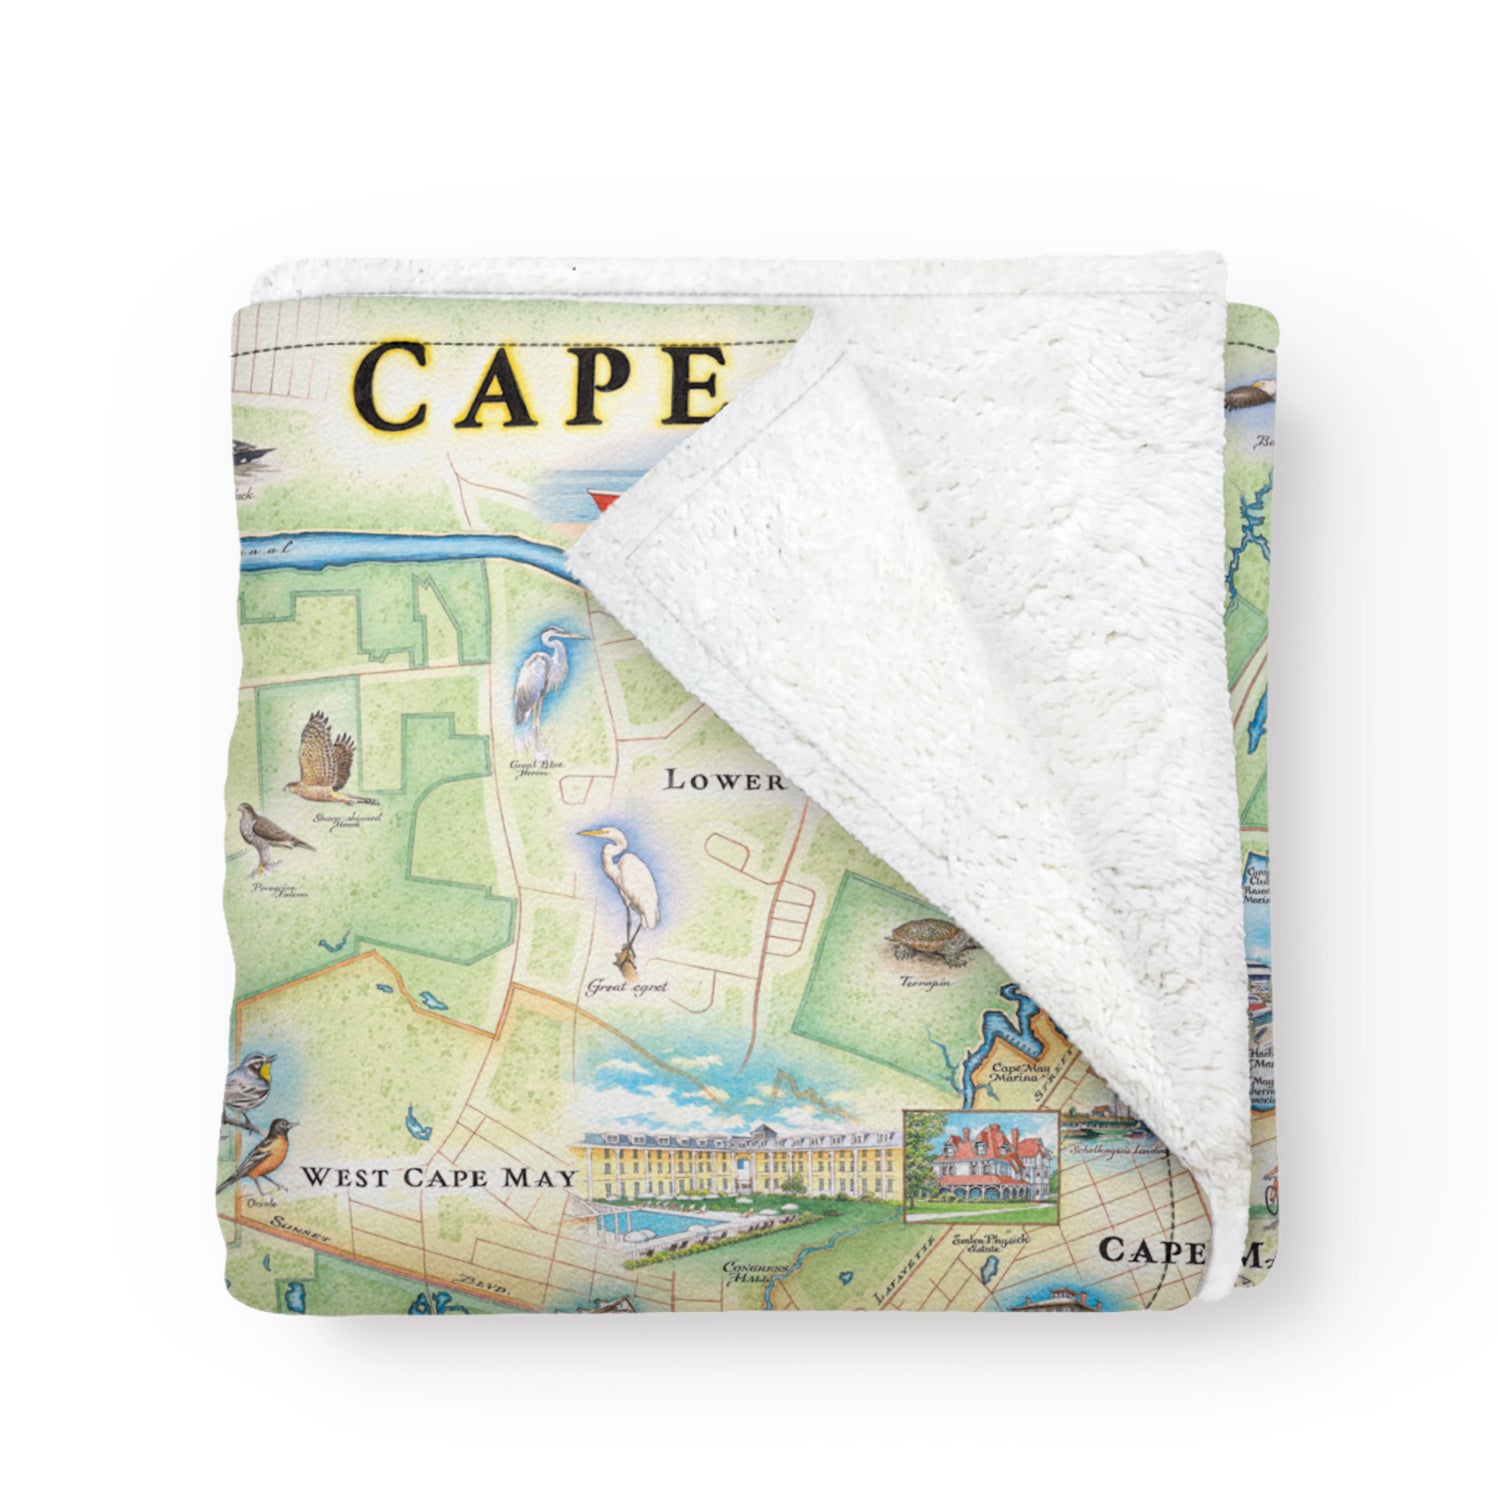 Cape May Map Fleece Blanket in earth tone colors. Featuring Plymouth Rock, fish, crane, fox, beach, lighthouse, and ocean. Measures 50